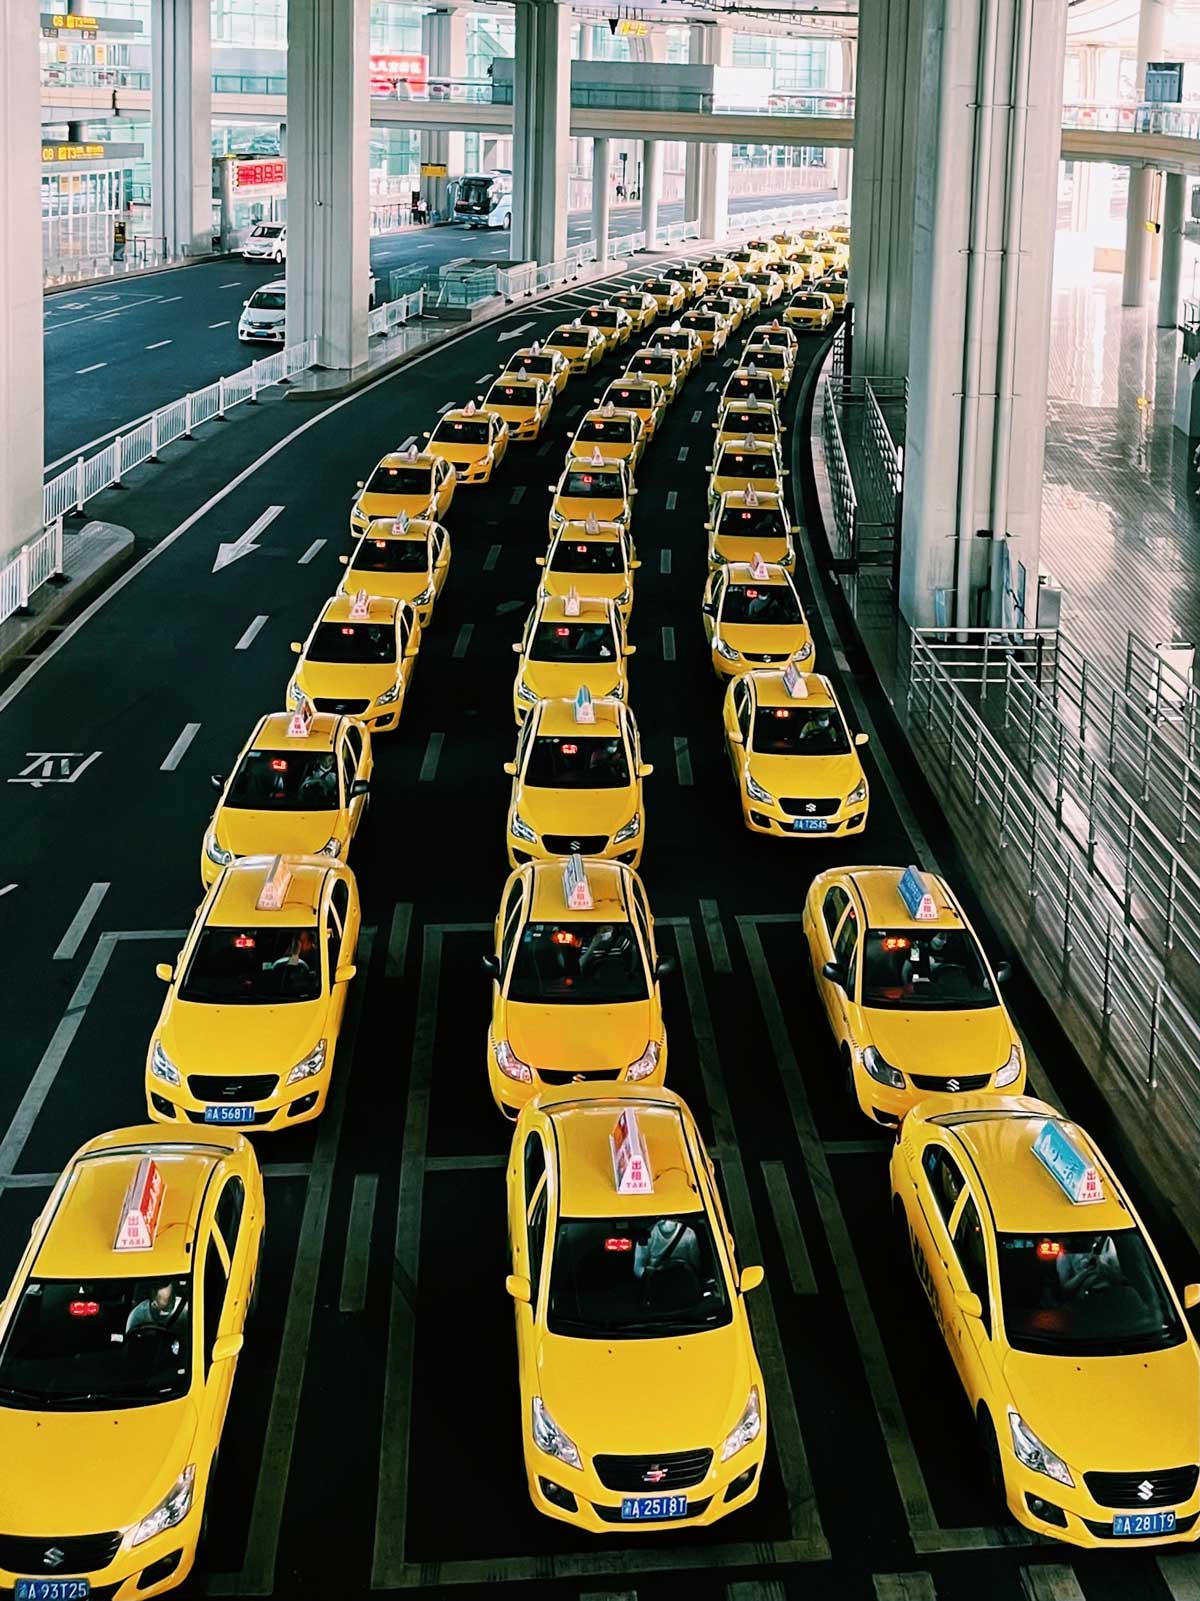 A row of yellow taxis lined up in orderly formation, symbolizing a systematic order like scientific experiments.